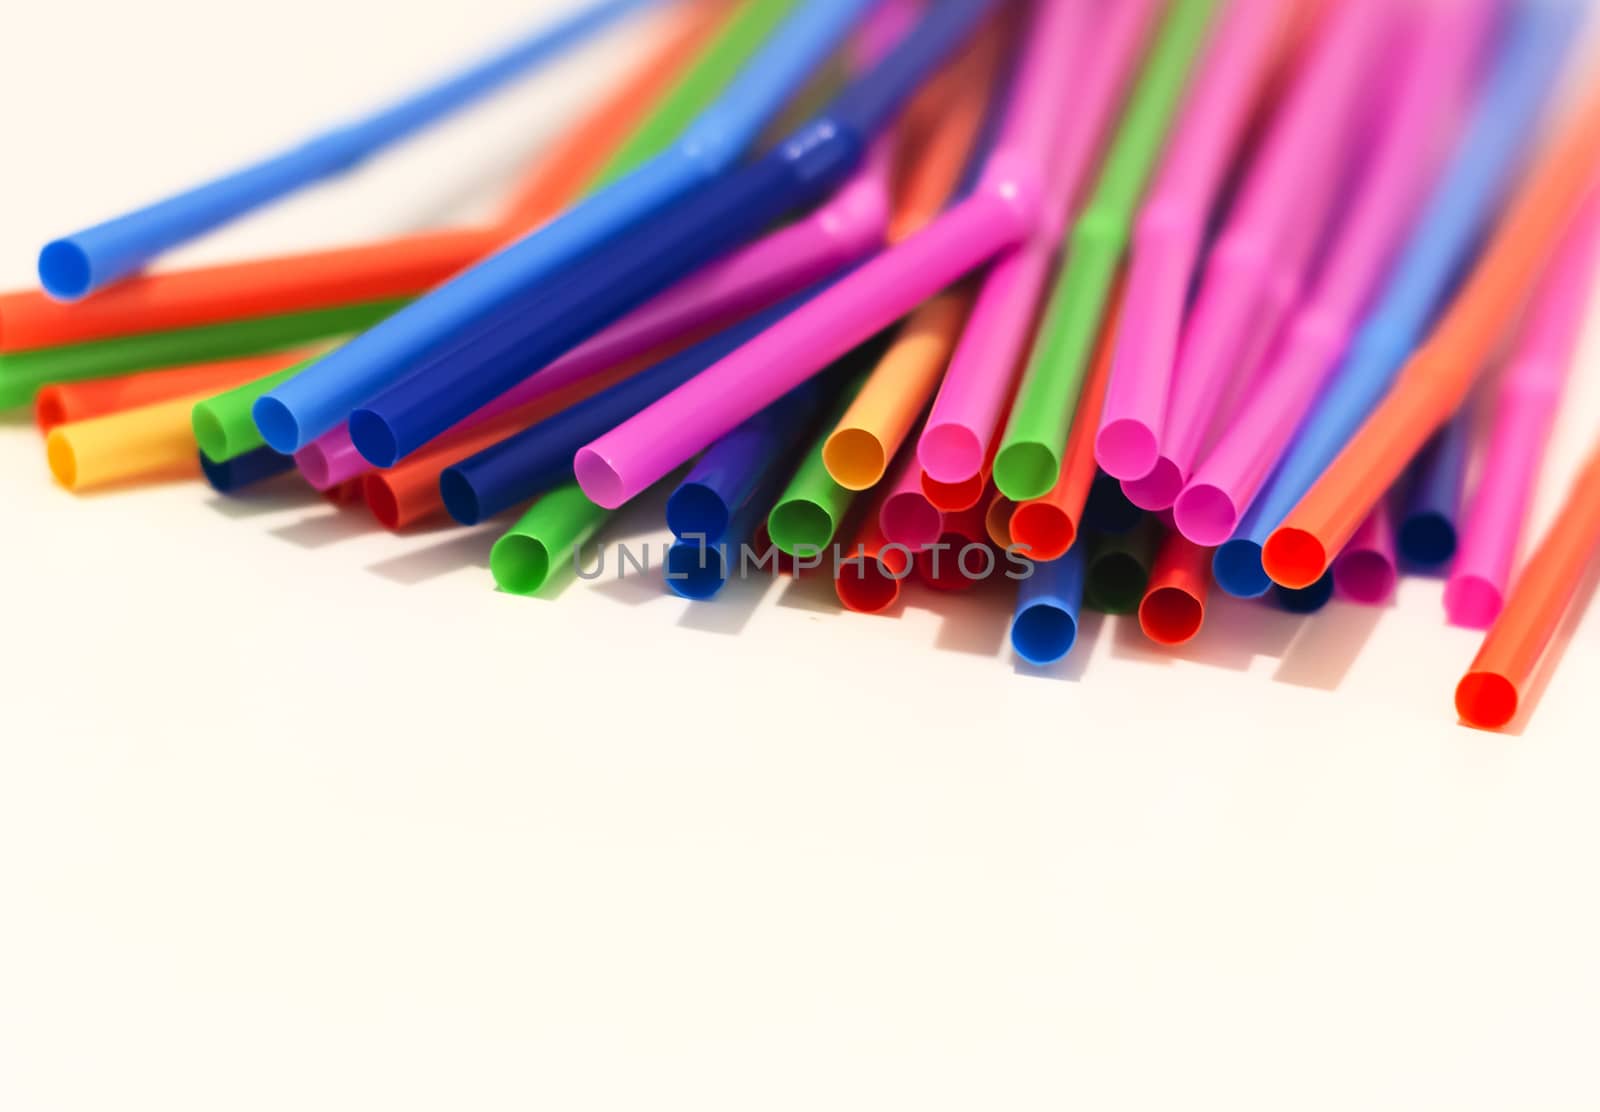 a group of colored plastic cocktail straws. Plastic and non-recyclable materials. by rarrarorro